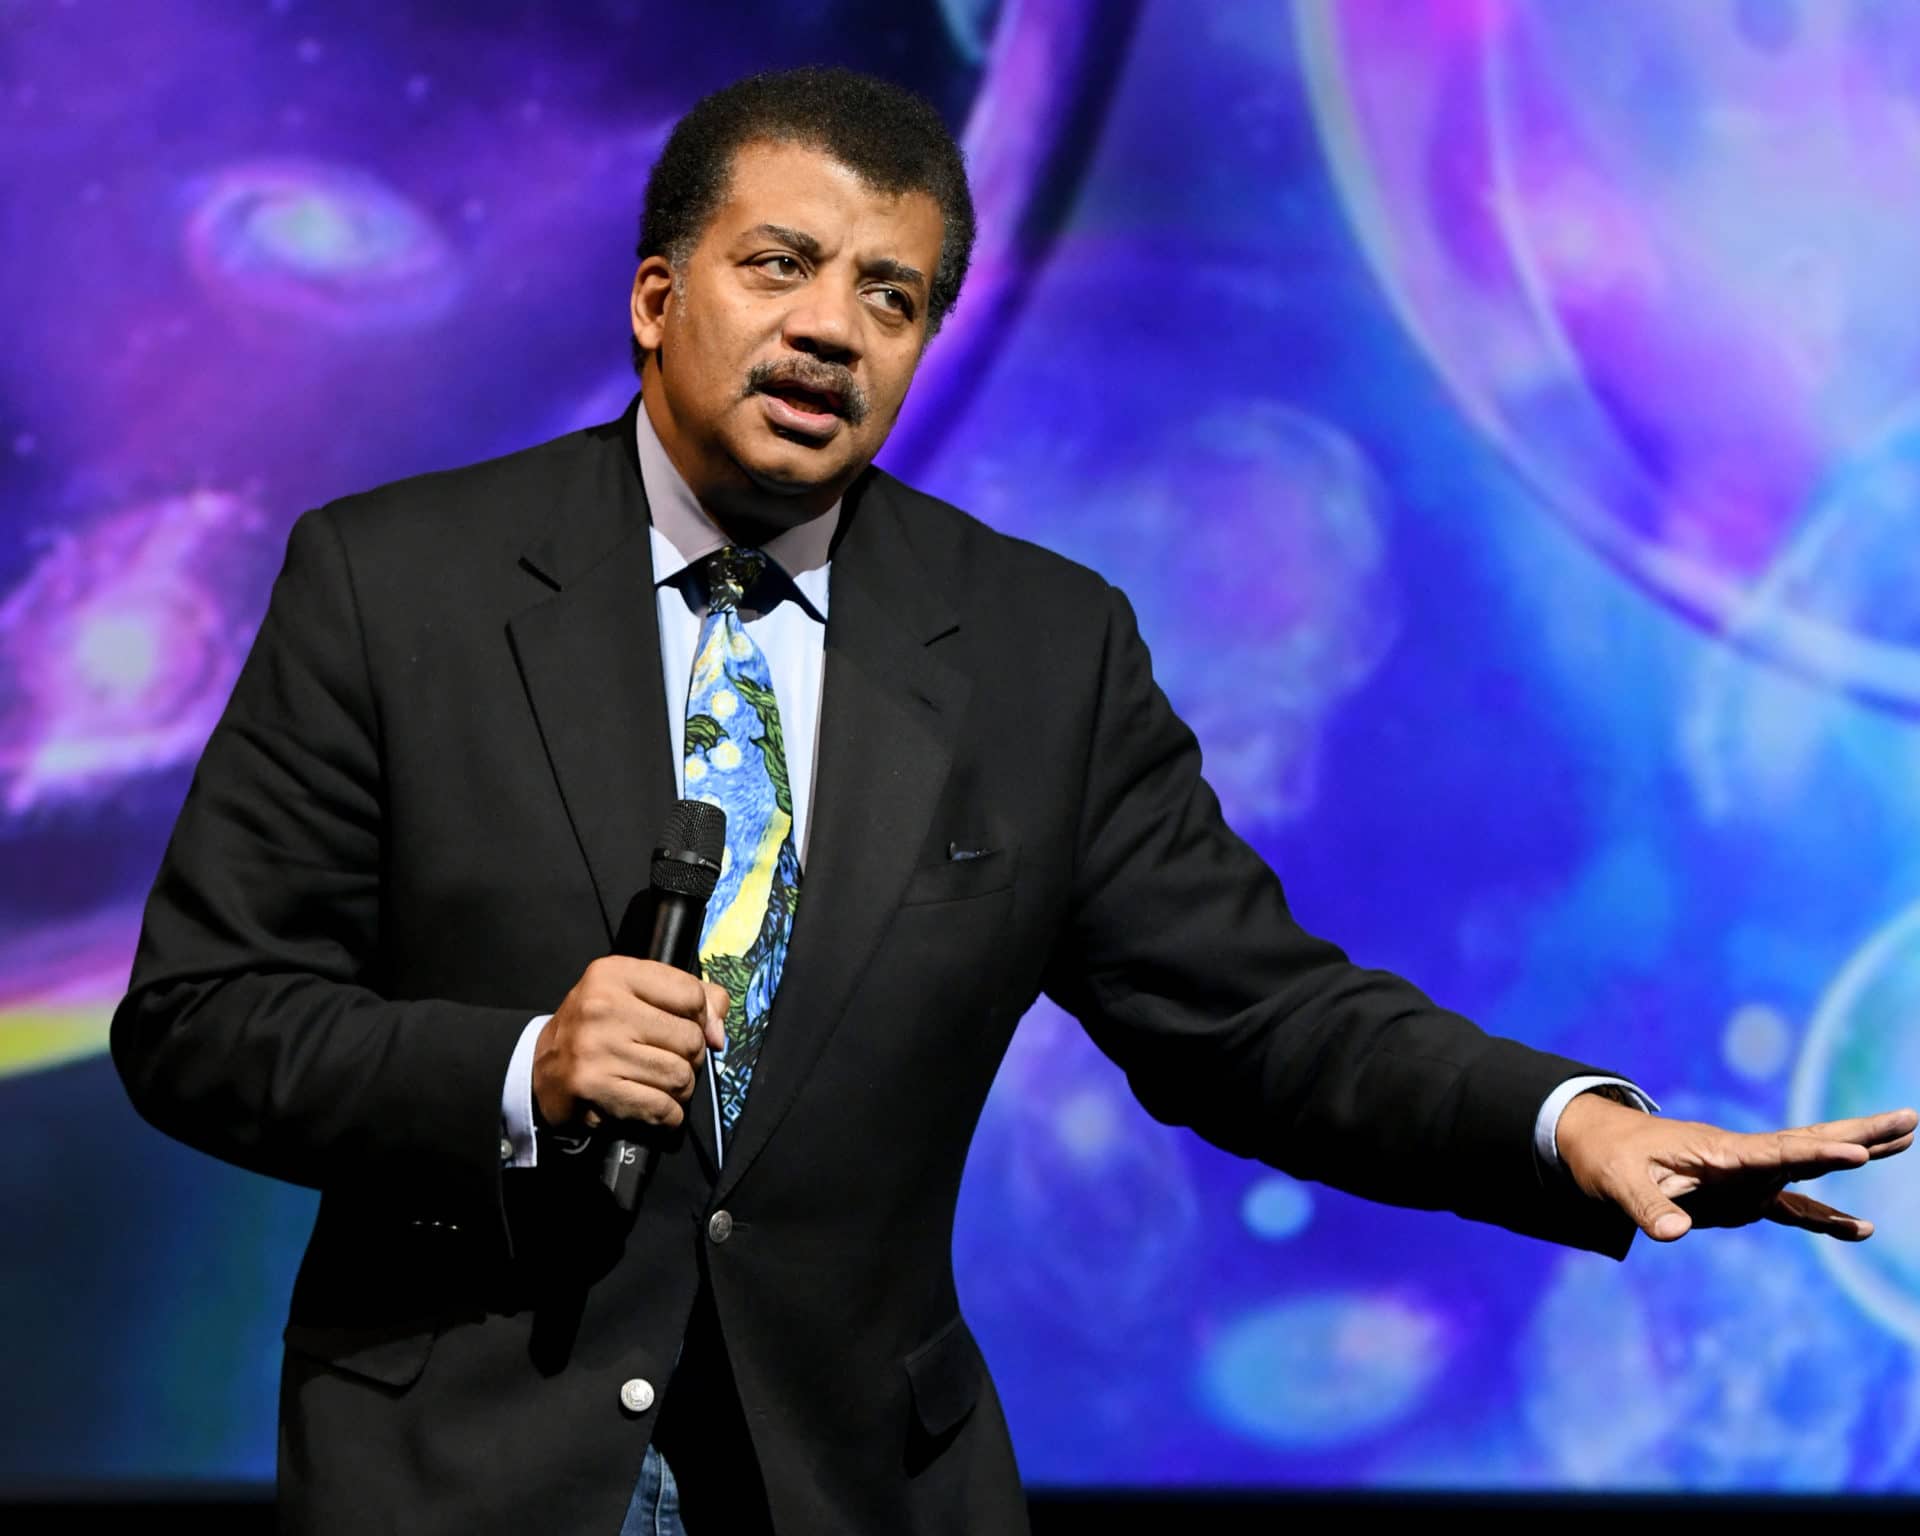 4th Woman Accuses Neil deGrasse Tyson Of Sexual Misconduct